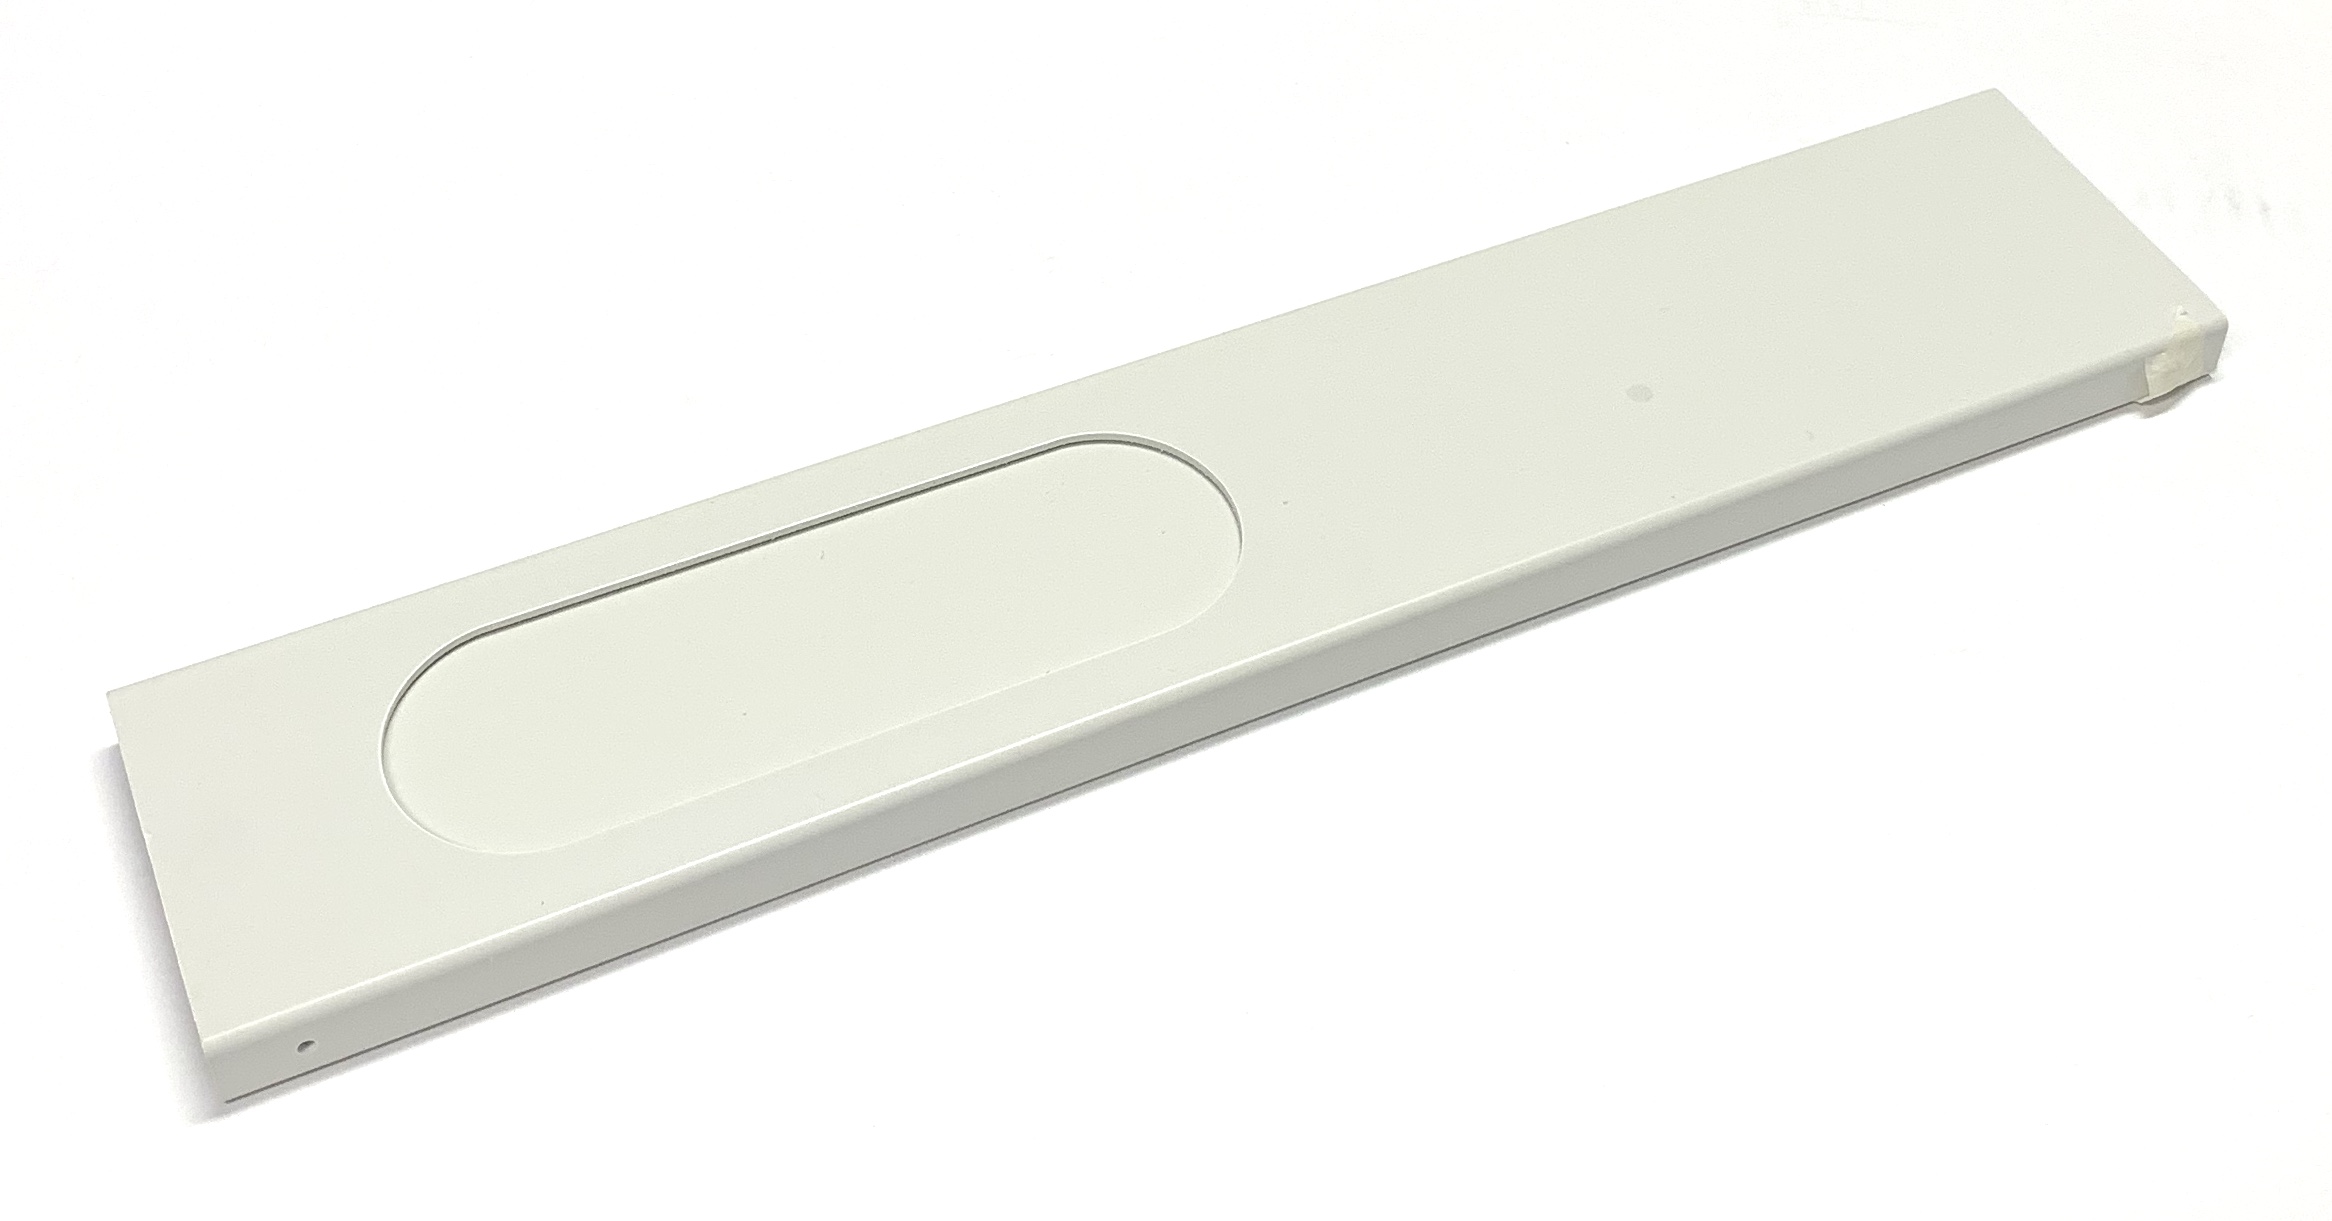 DeLONGHI OEM Delonghi One Hole Window Slider Originally Shipped With PACAN140ES, PACAN125ESB, PACEX270LN3ADG